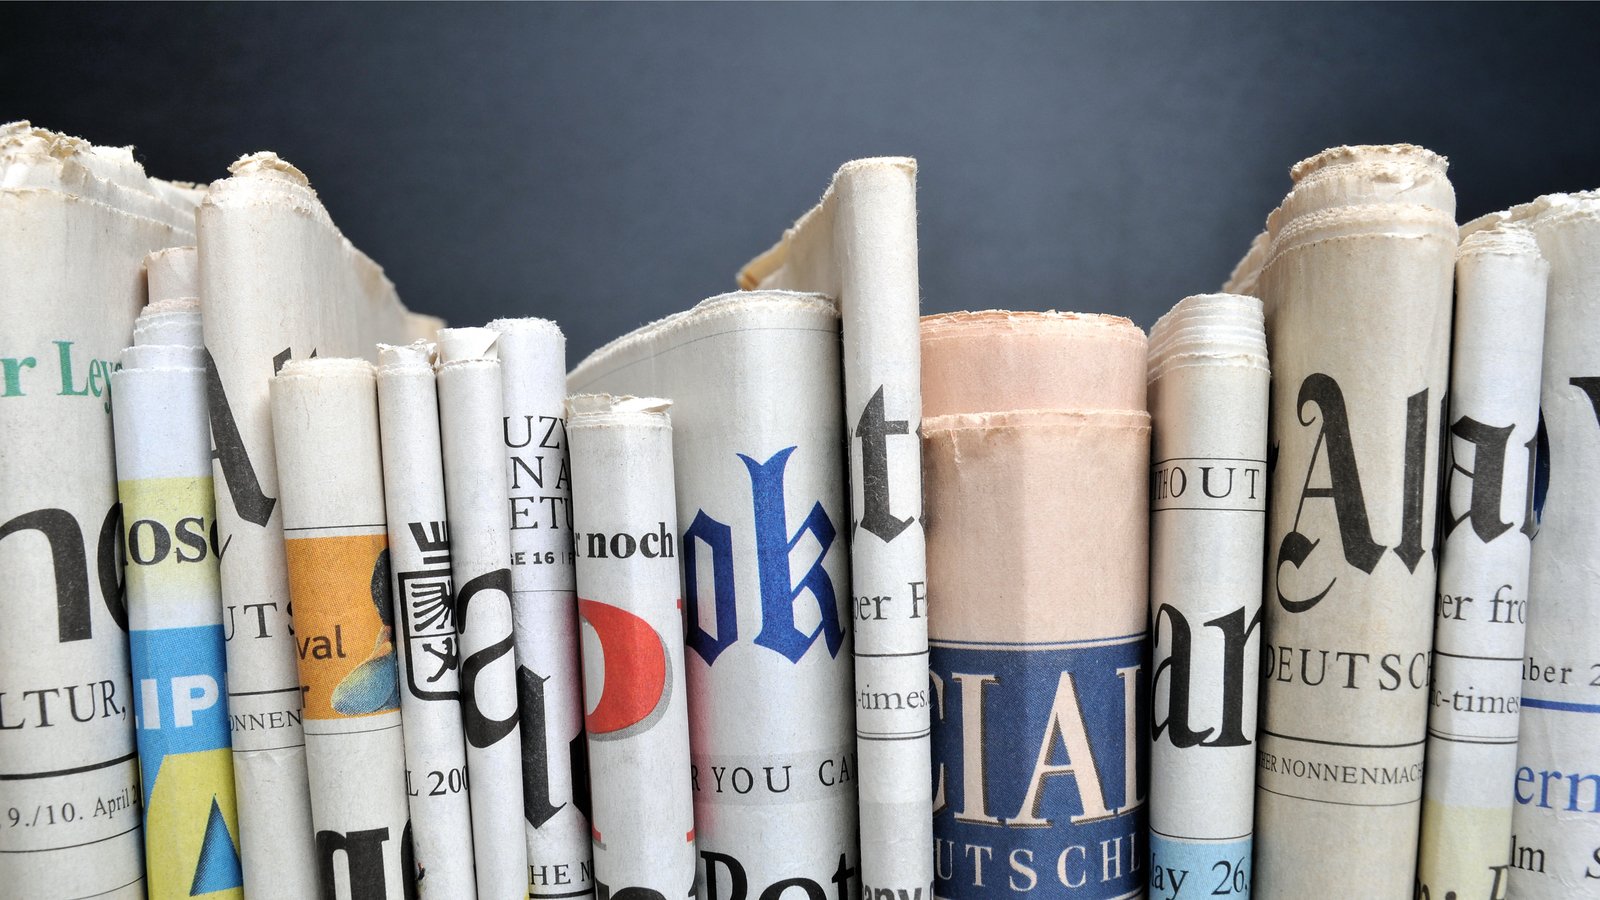 newspapers folded and arranged in row like books on a shelf. gray background.